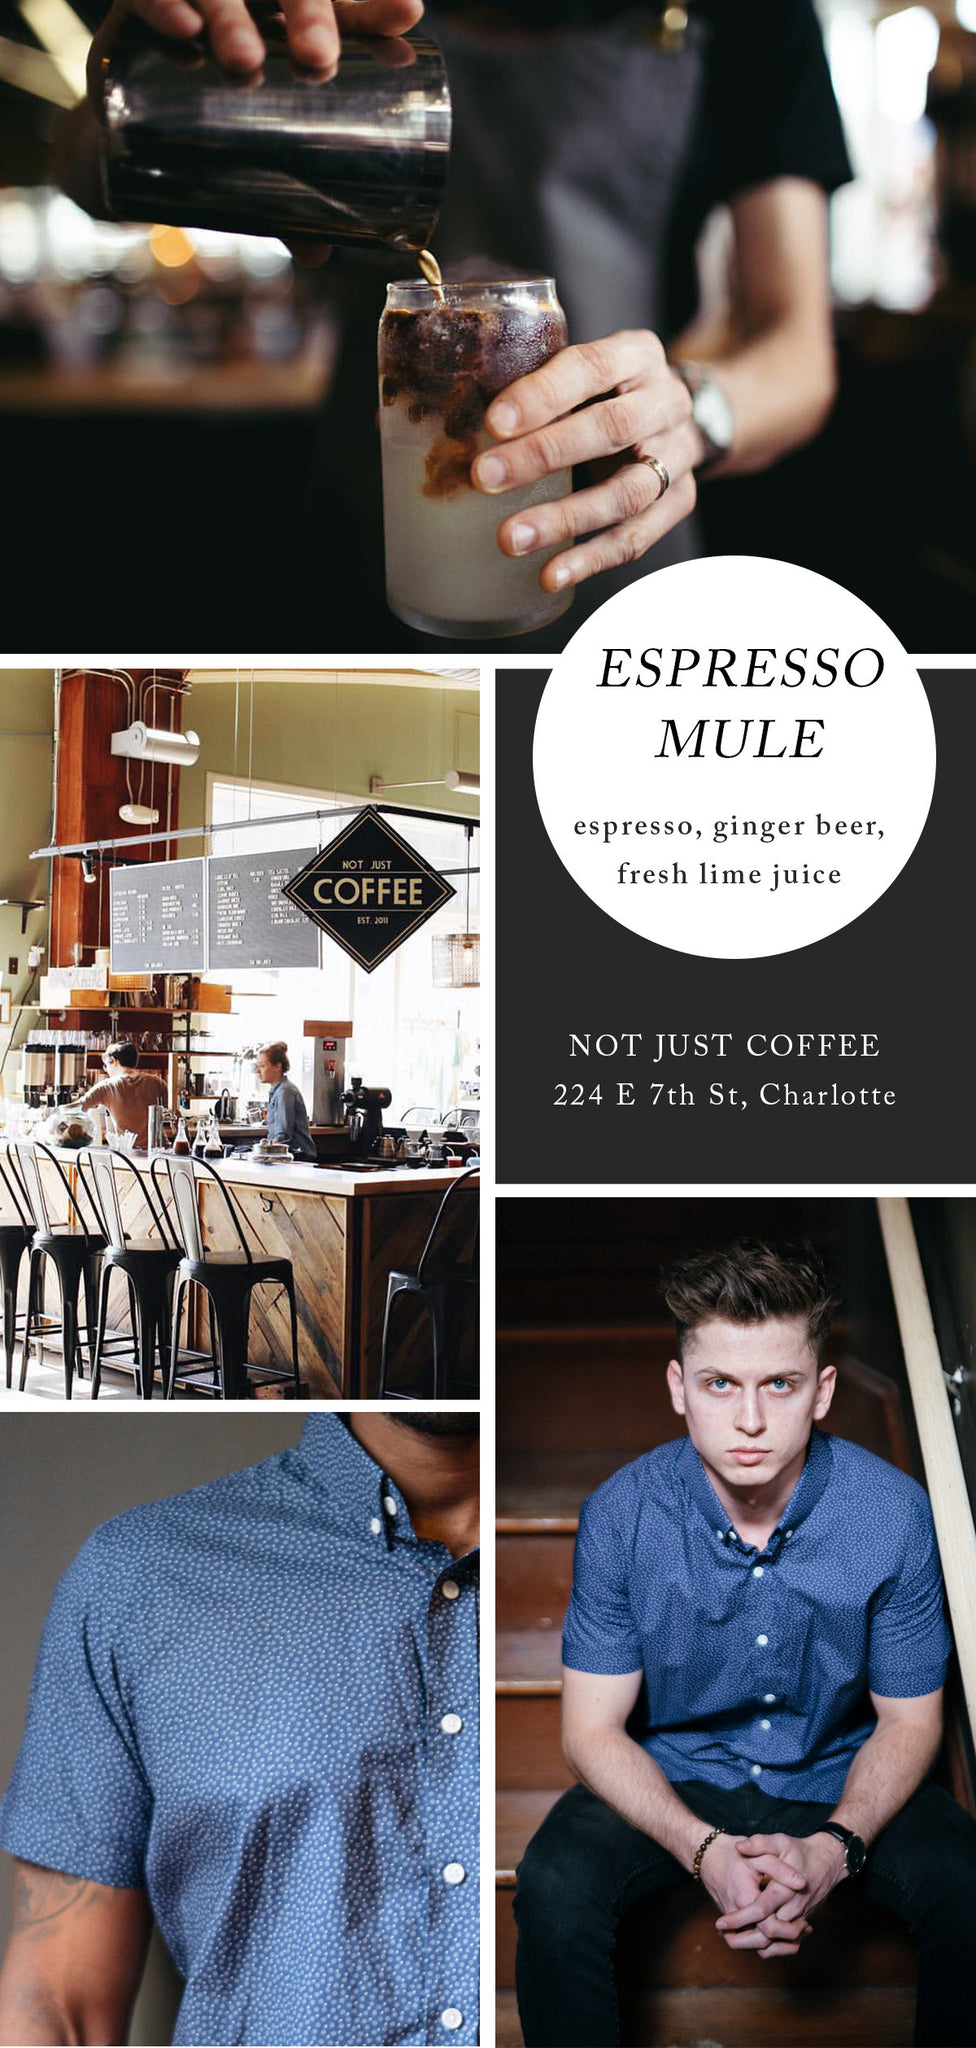 Espresso Mule from Not Just Coffee